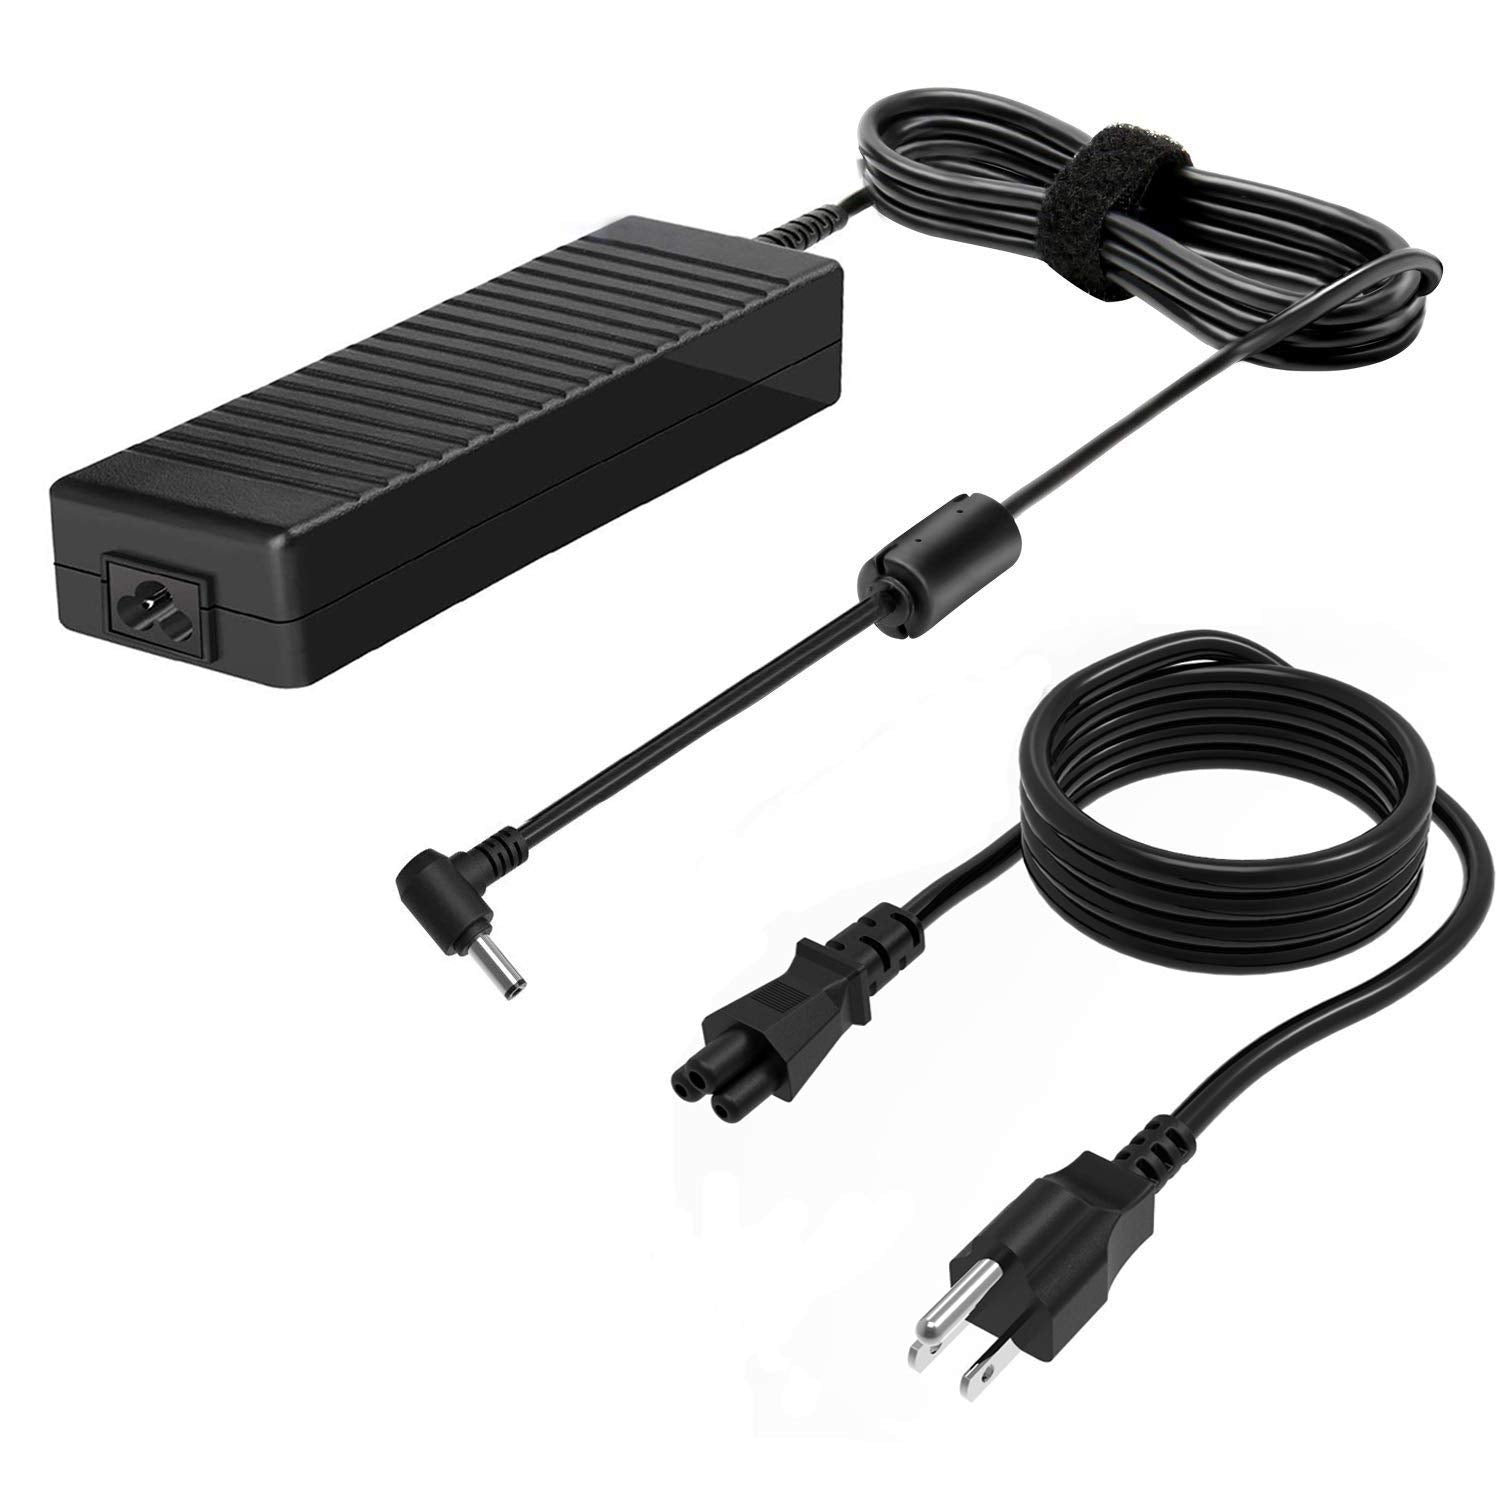 Power Supply for HP U28 4K HDR Monitor.